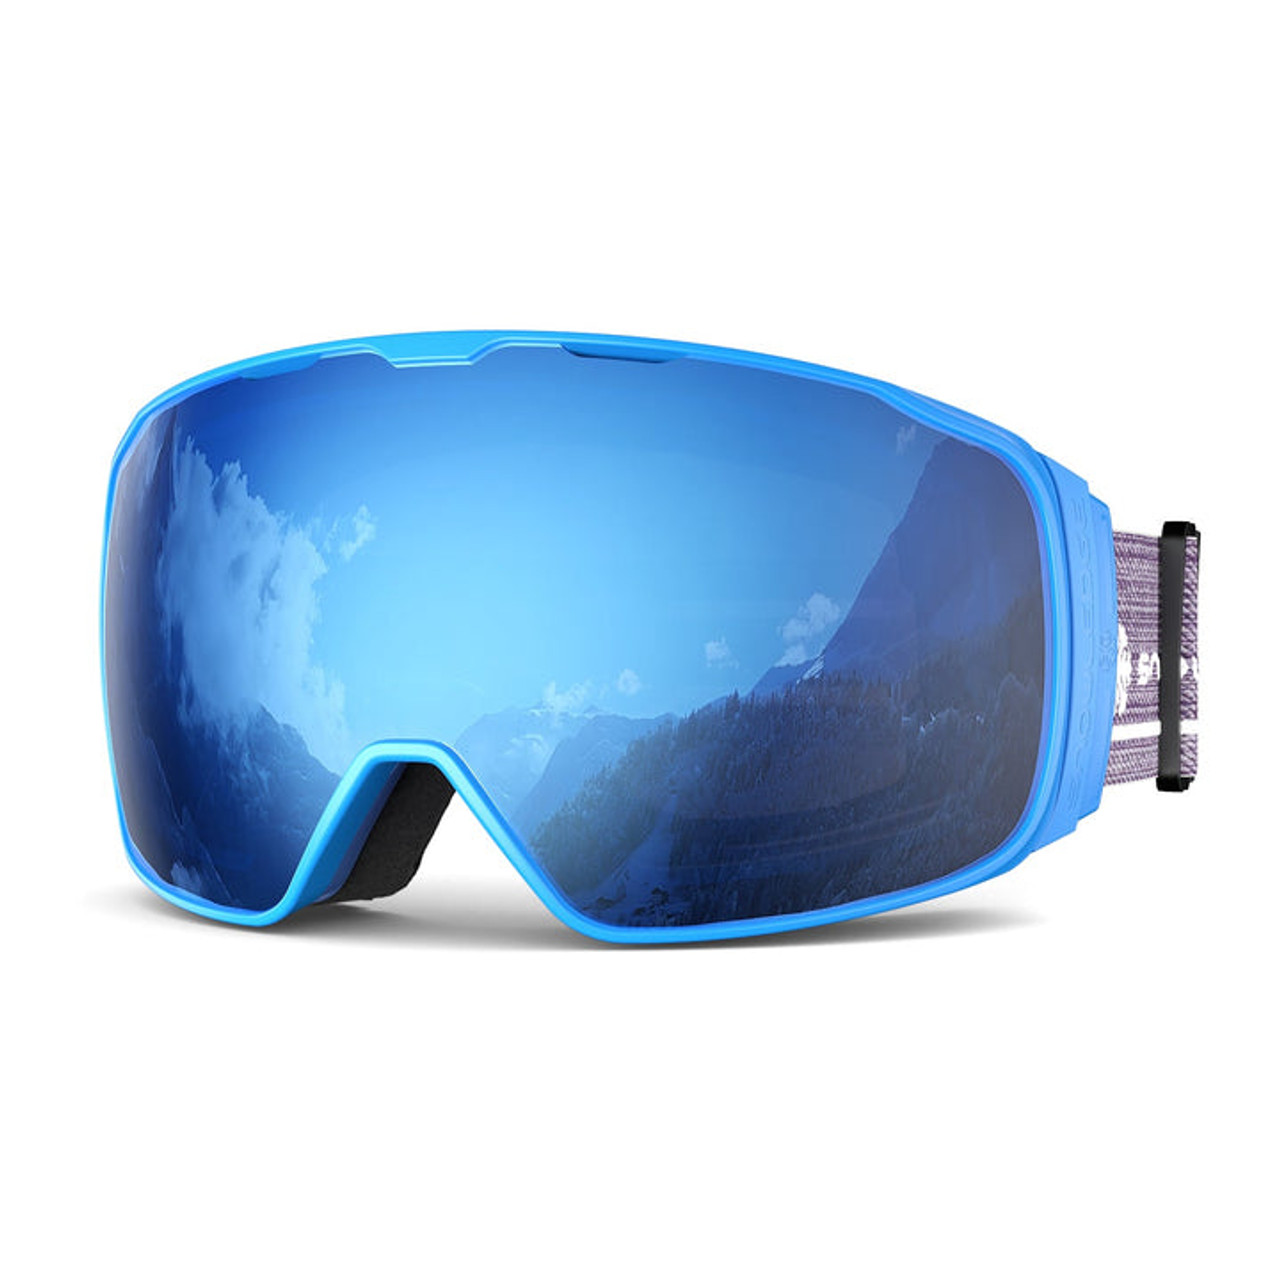 Cloud 9 - Ski Snowboarding Goggles Kids Blue Camouflage Silver Mirror Lens  Snow